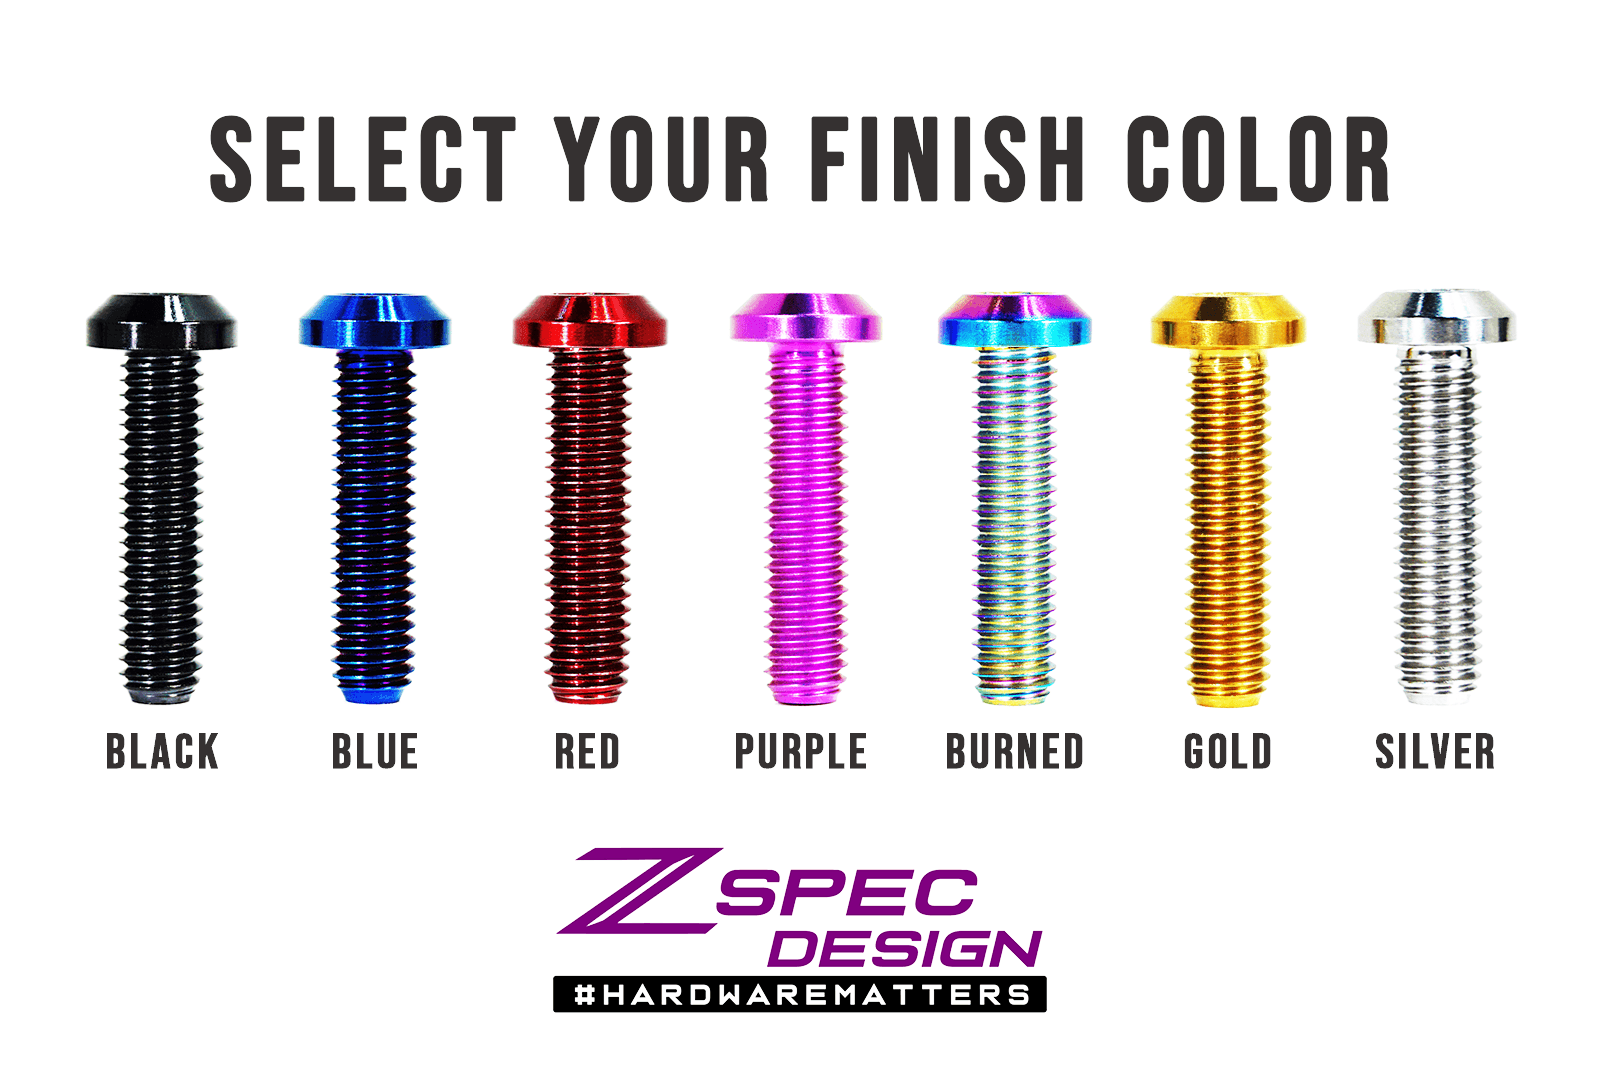 ZSPEC Plastic Service Panel Air Guide Clips Replacement Fastener Kit, Titanium, for Nissan 350z Z33 Dress Up Bolts Fasteners Washers Red Blue Purple Gold Burned Black Not VQ35 DE HR Manual Shift Sports Car